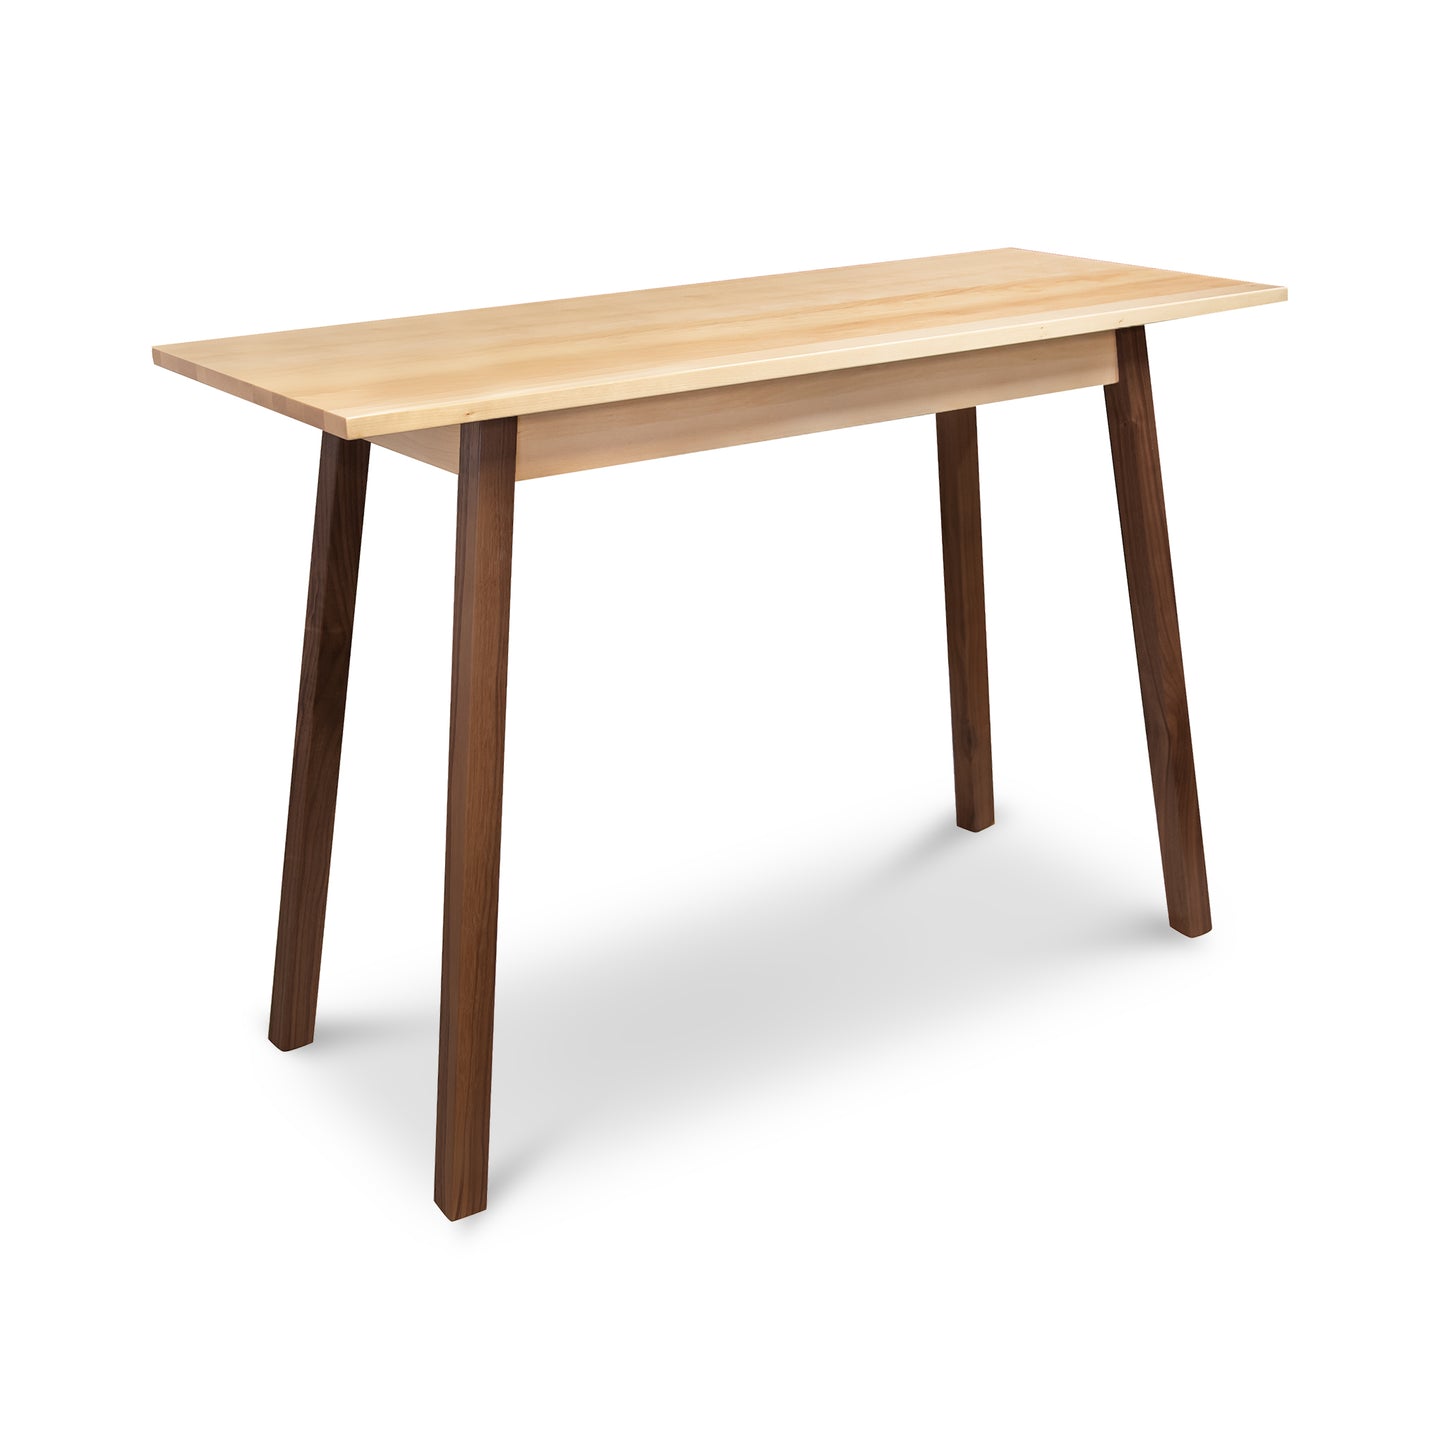 A wooden table with two legs and a wooden top.